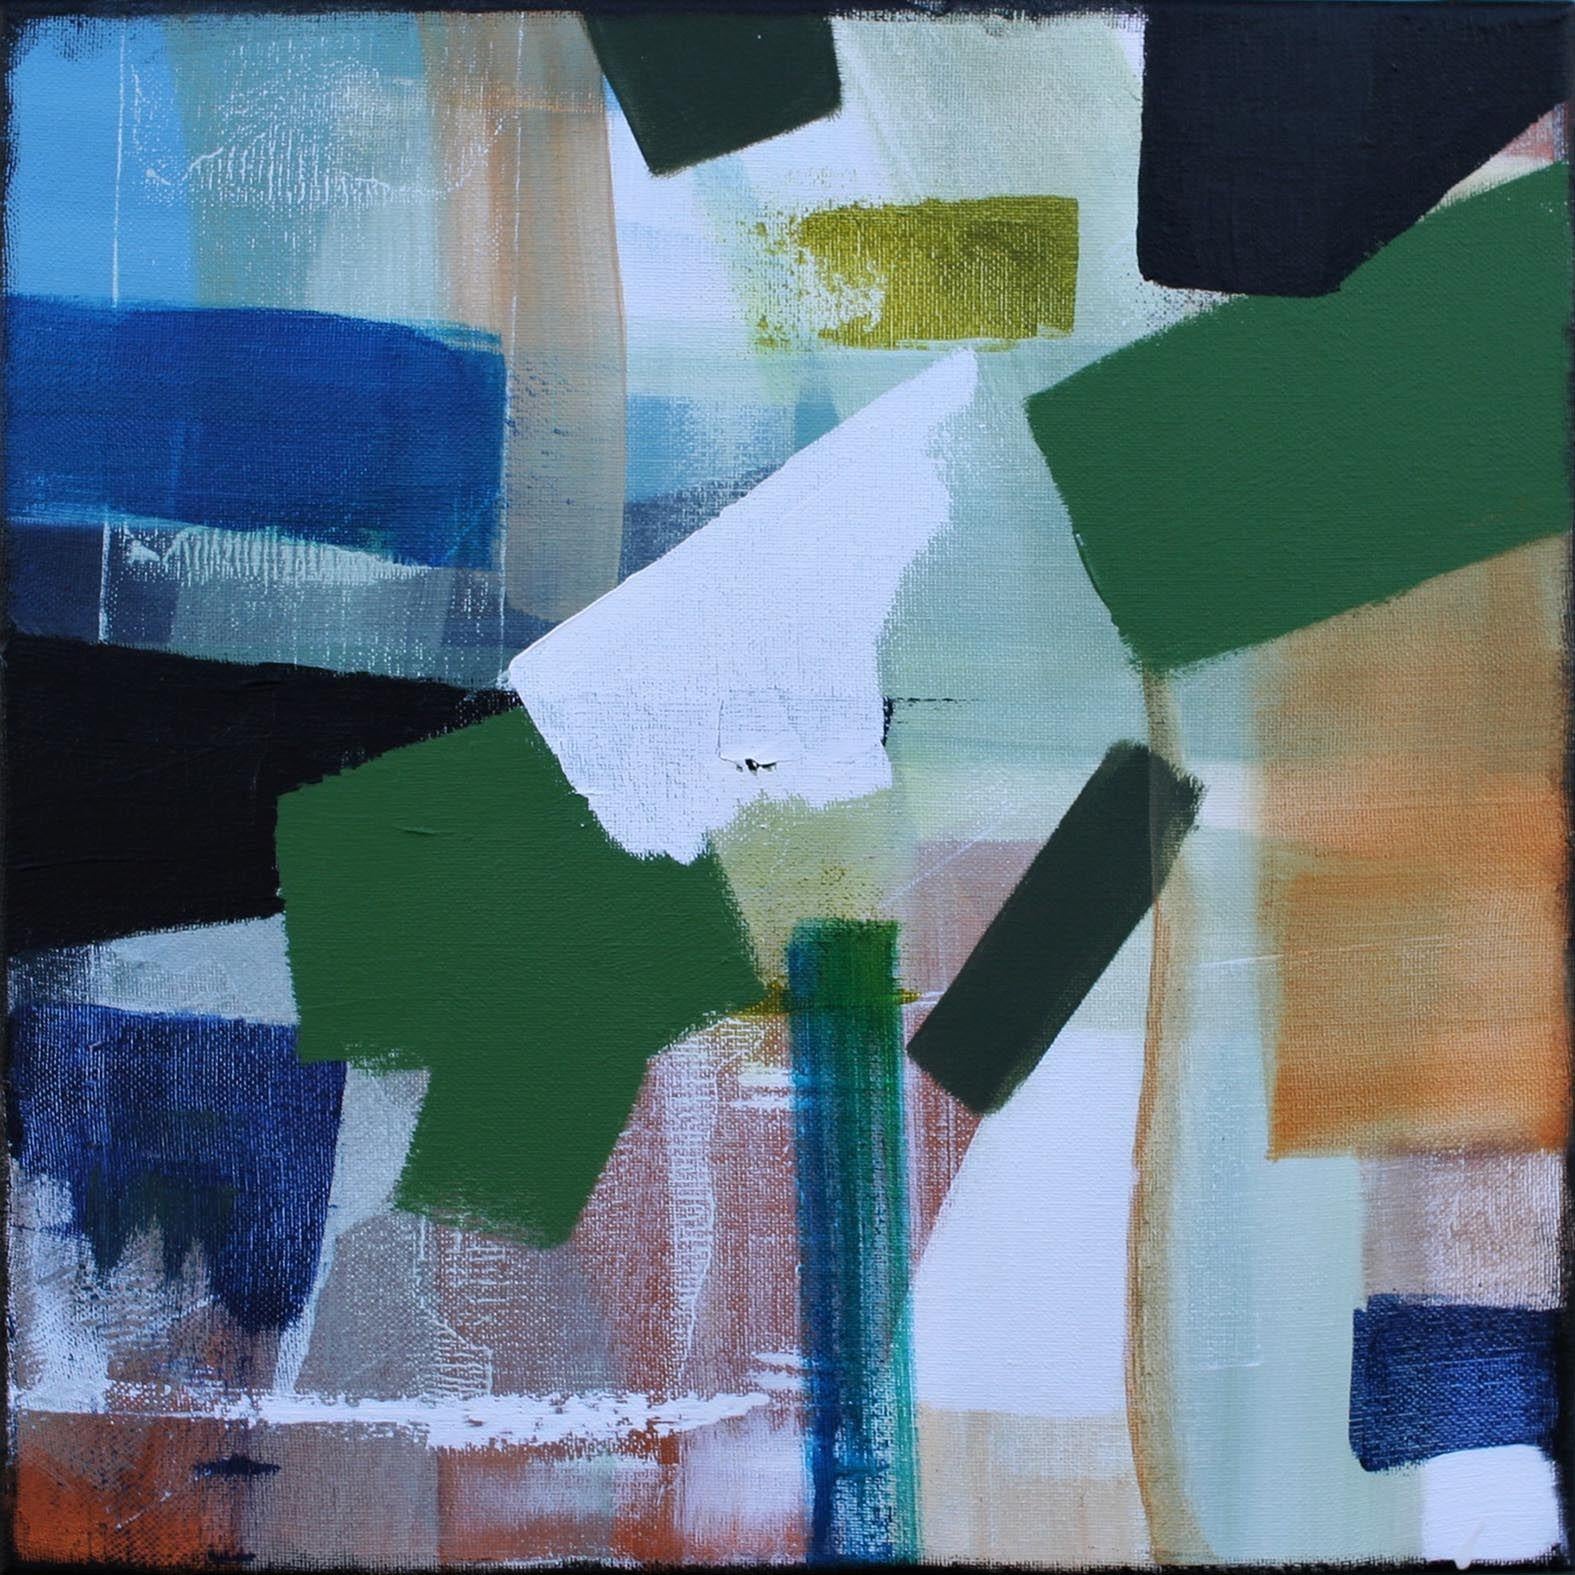 Abstract Joie de vivre, Painting, Acrylic on Canvas 2